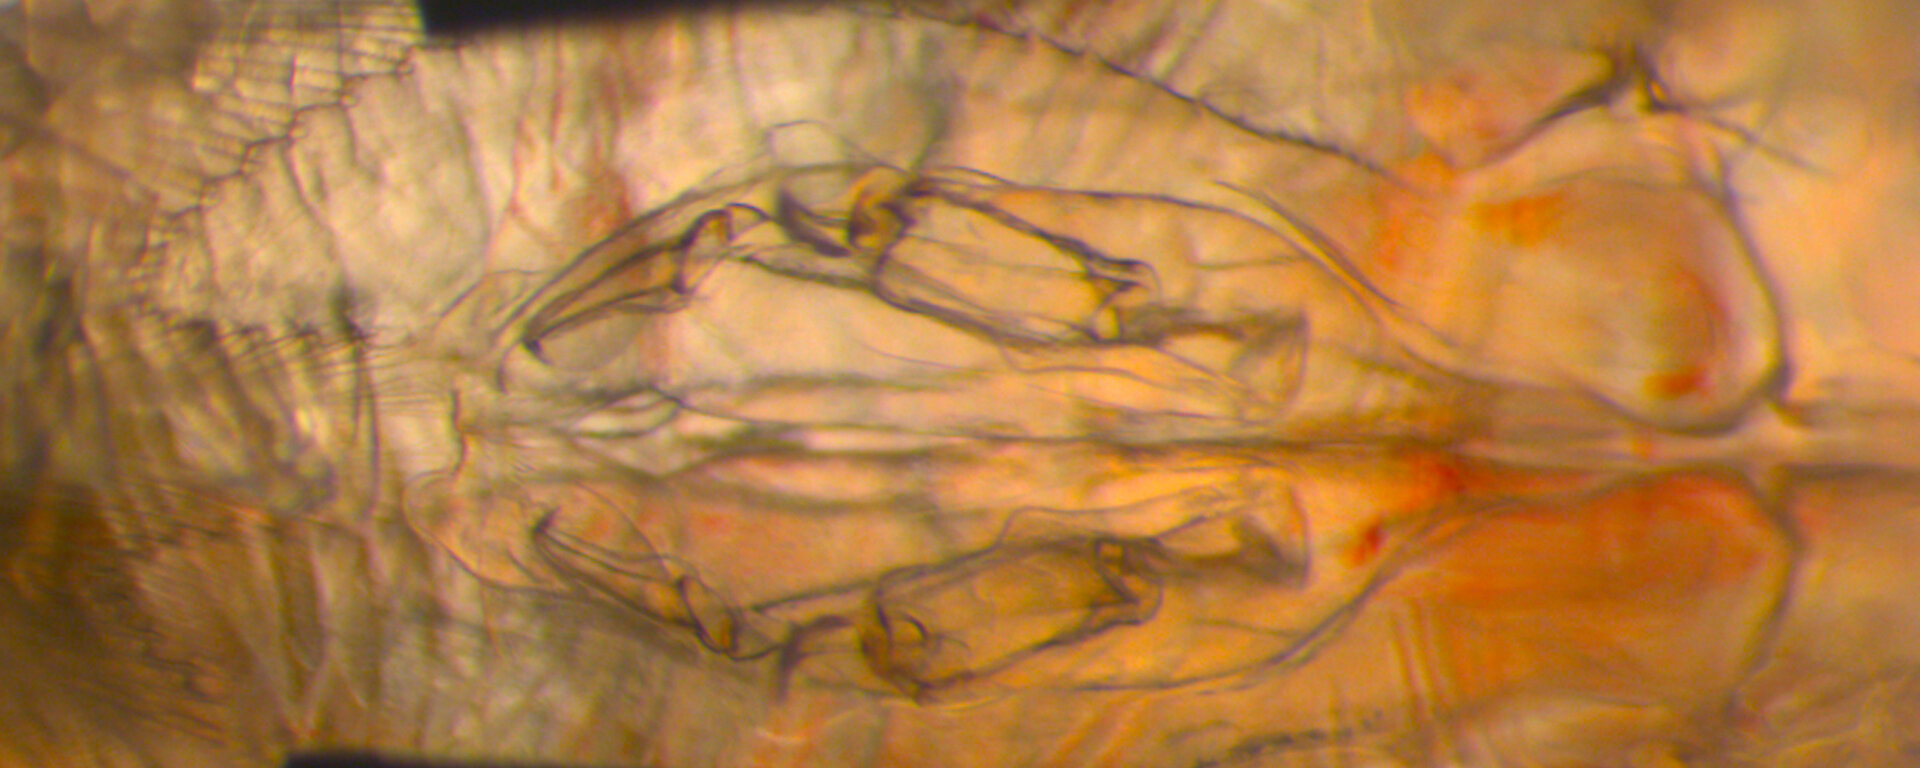 A male krill reproductive structure under the microscope.